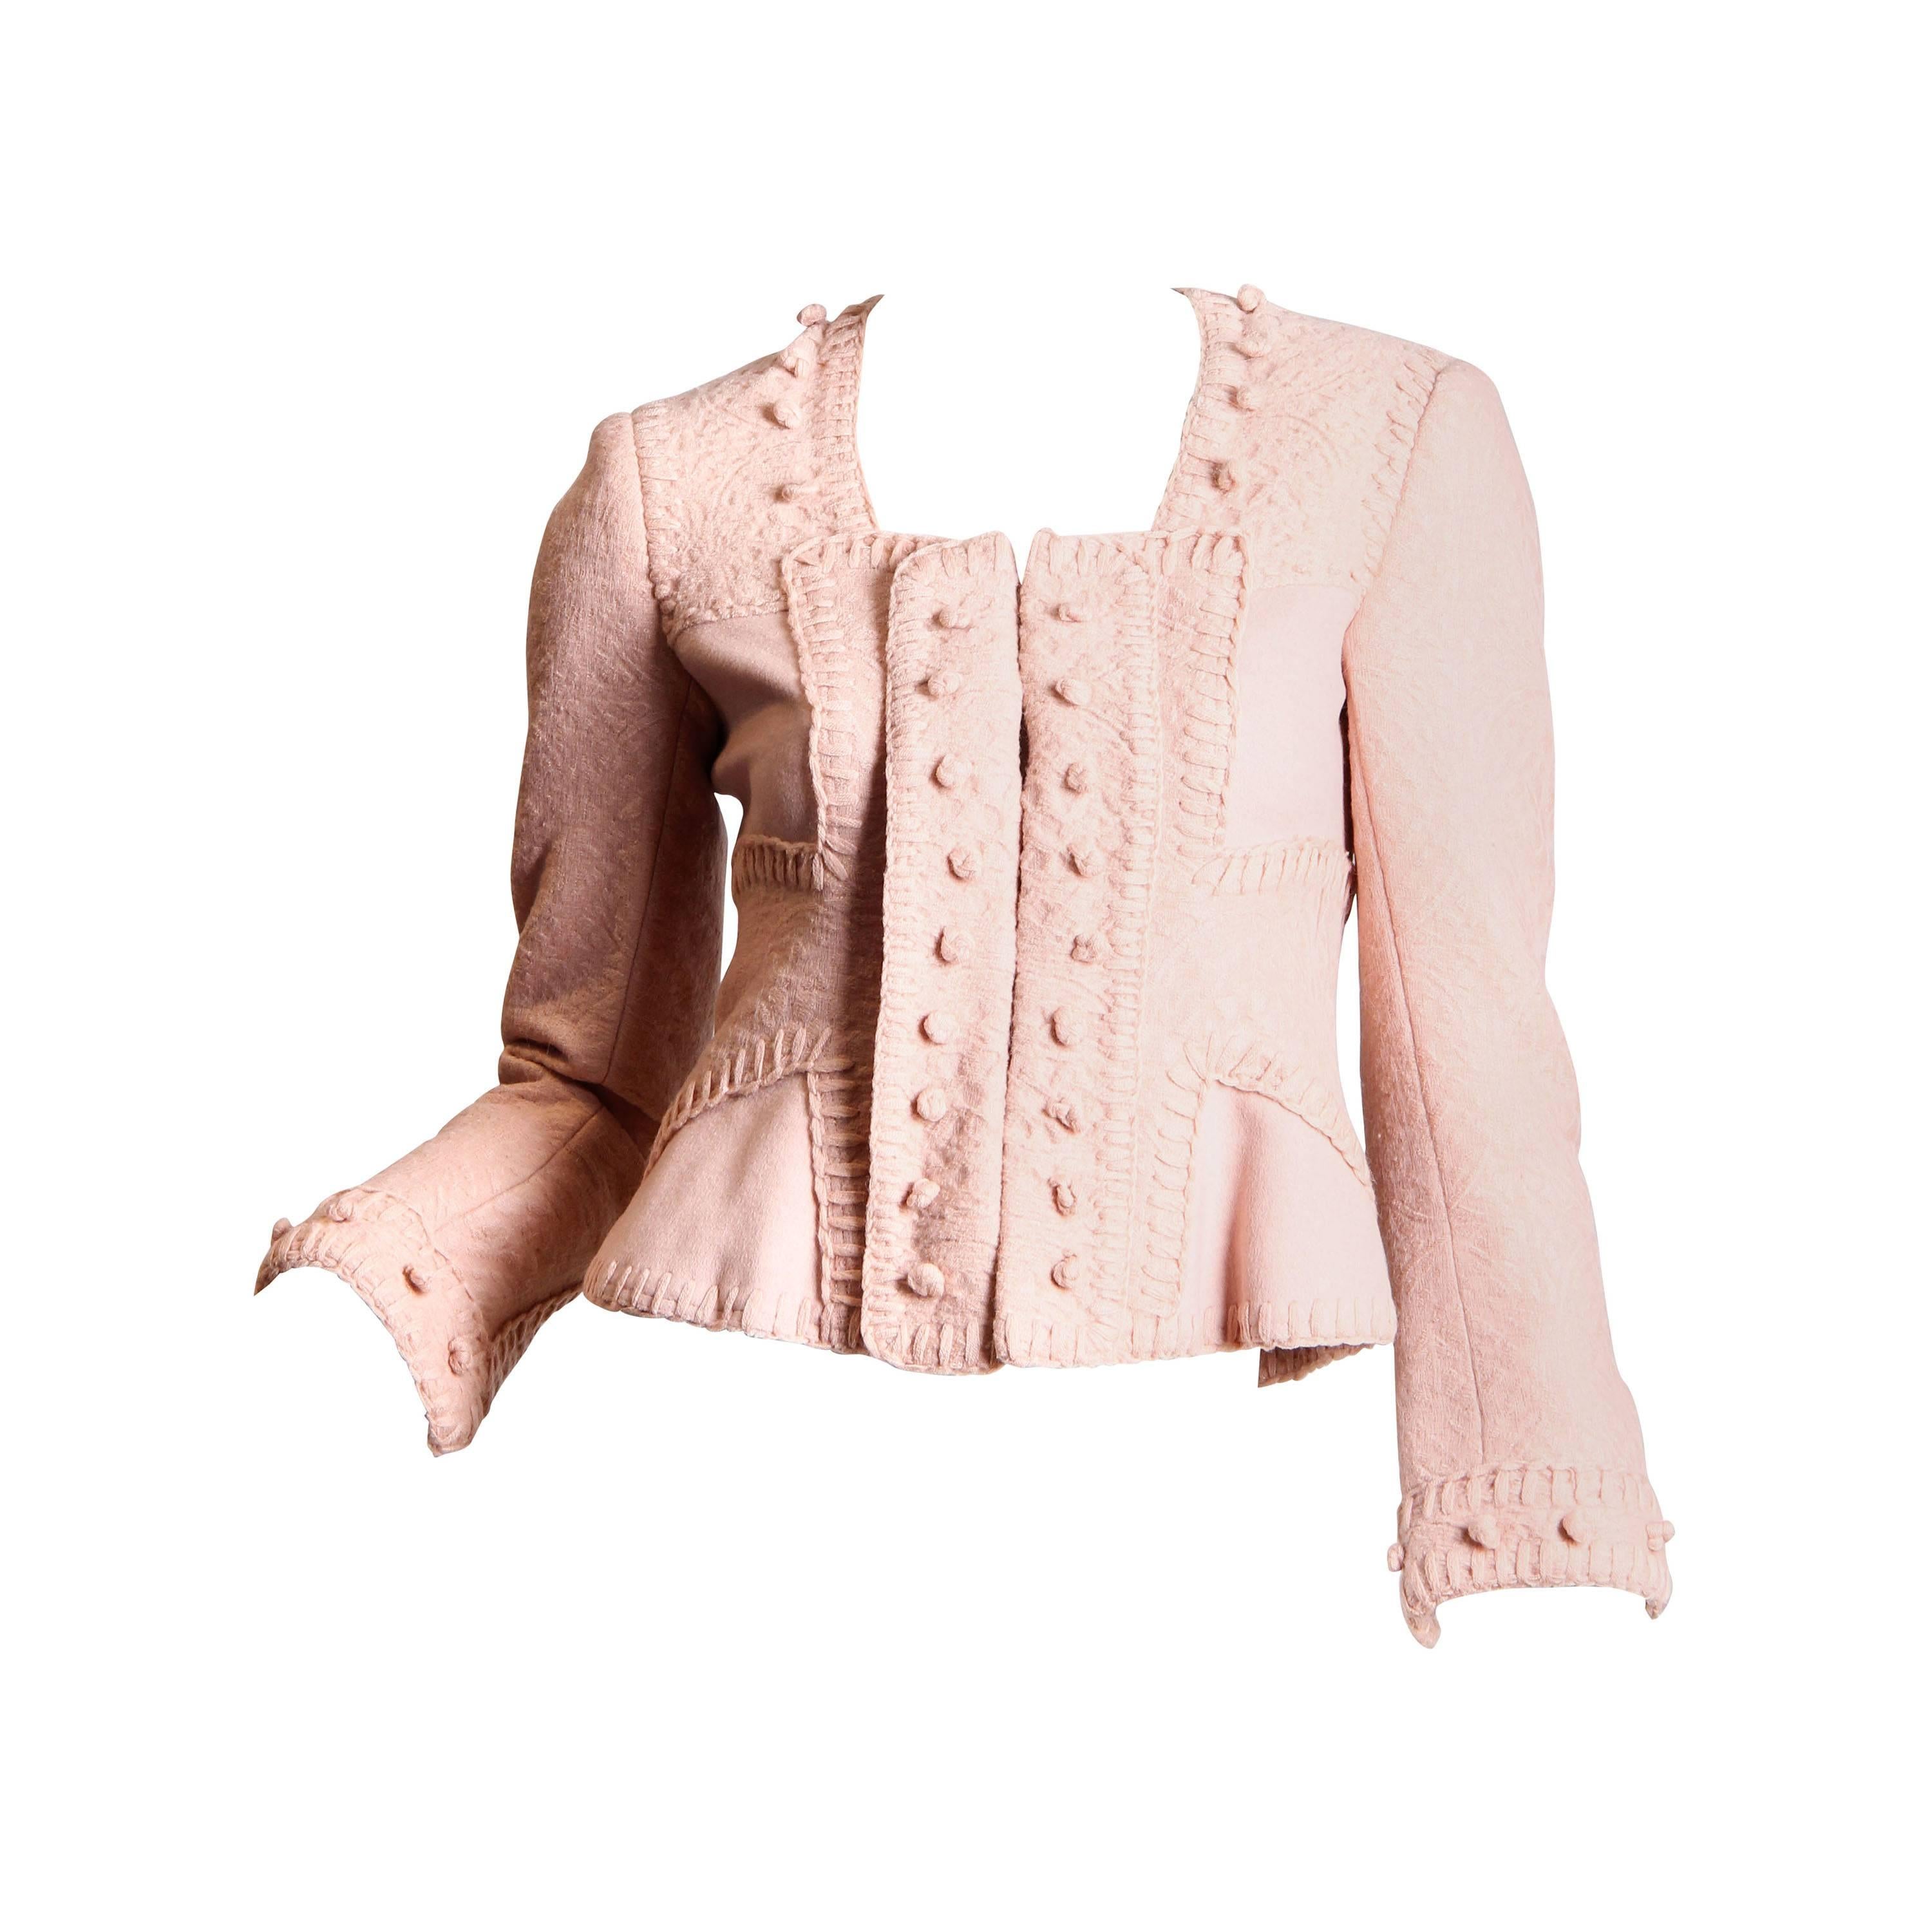 2000S YVES SAINT LAURENT Baby Pink Wool Blend Brocade Tom Ford For YSL Jacket